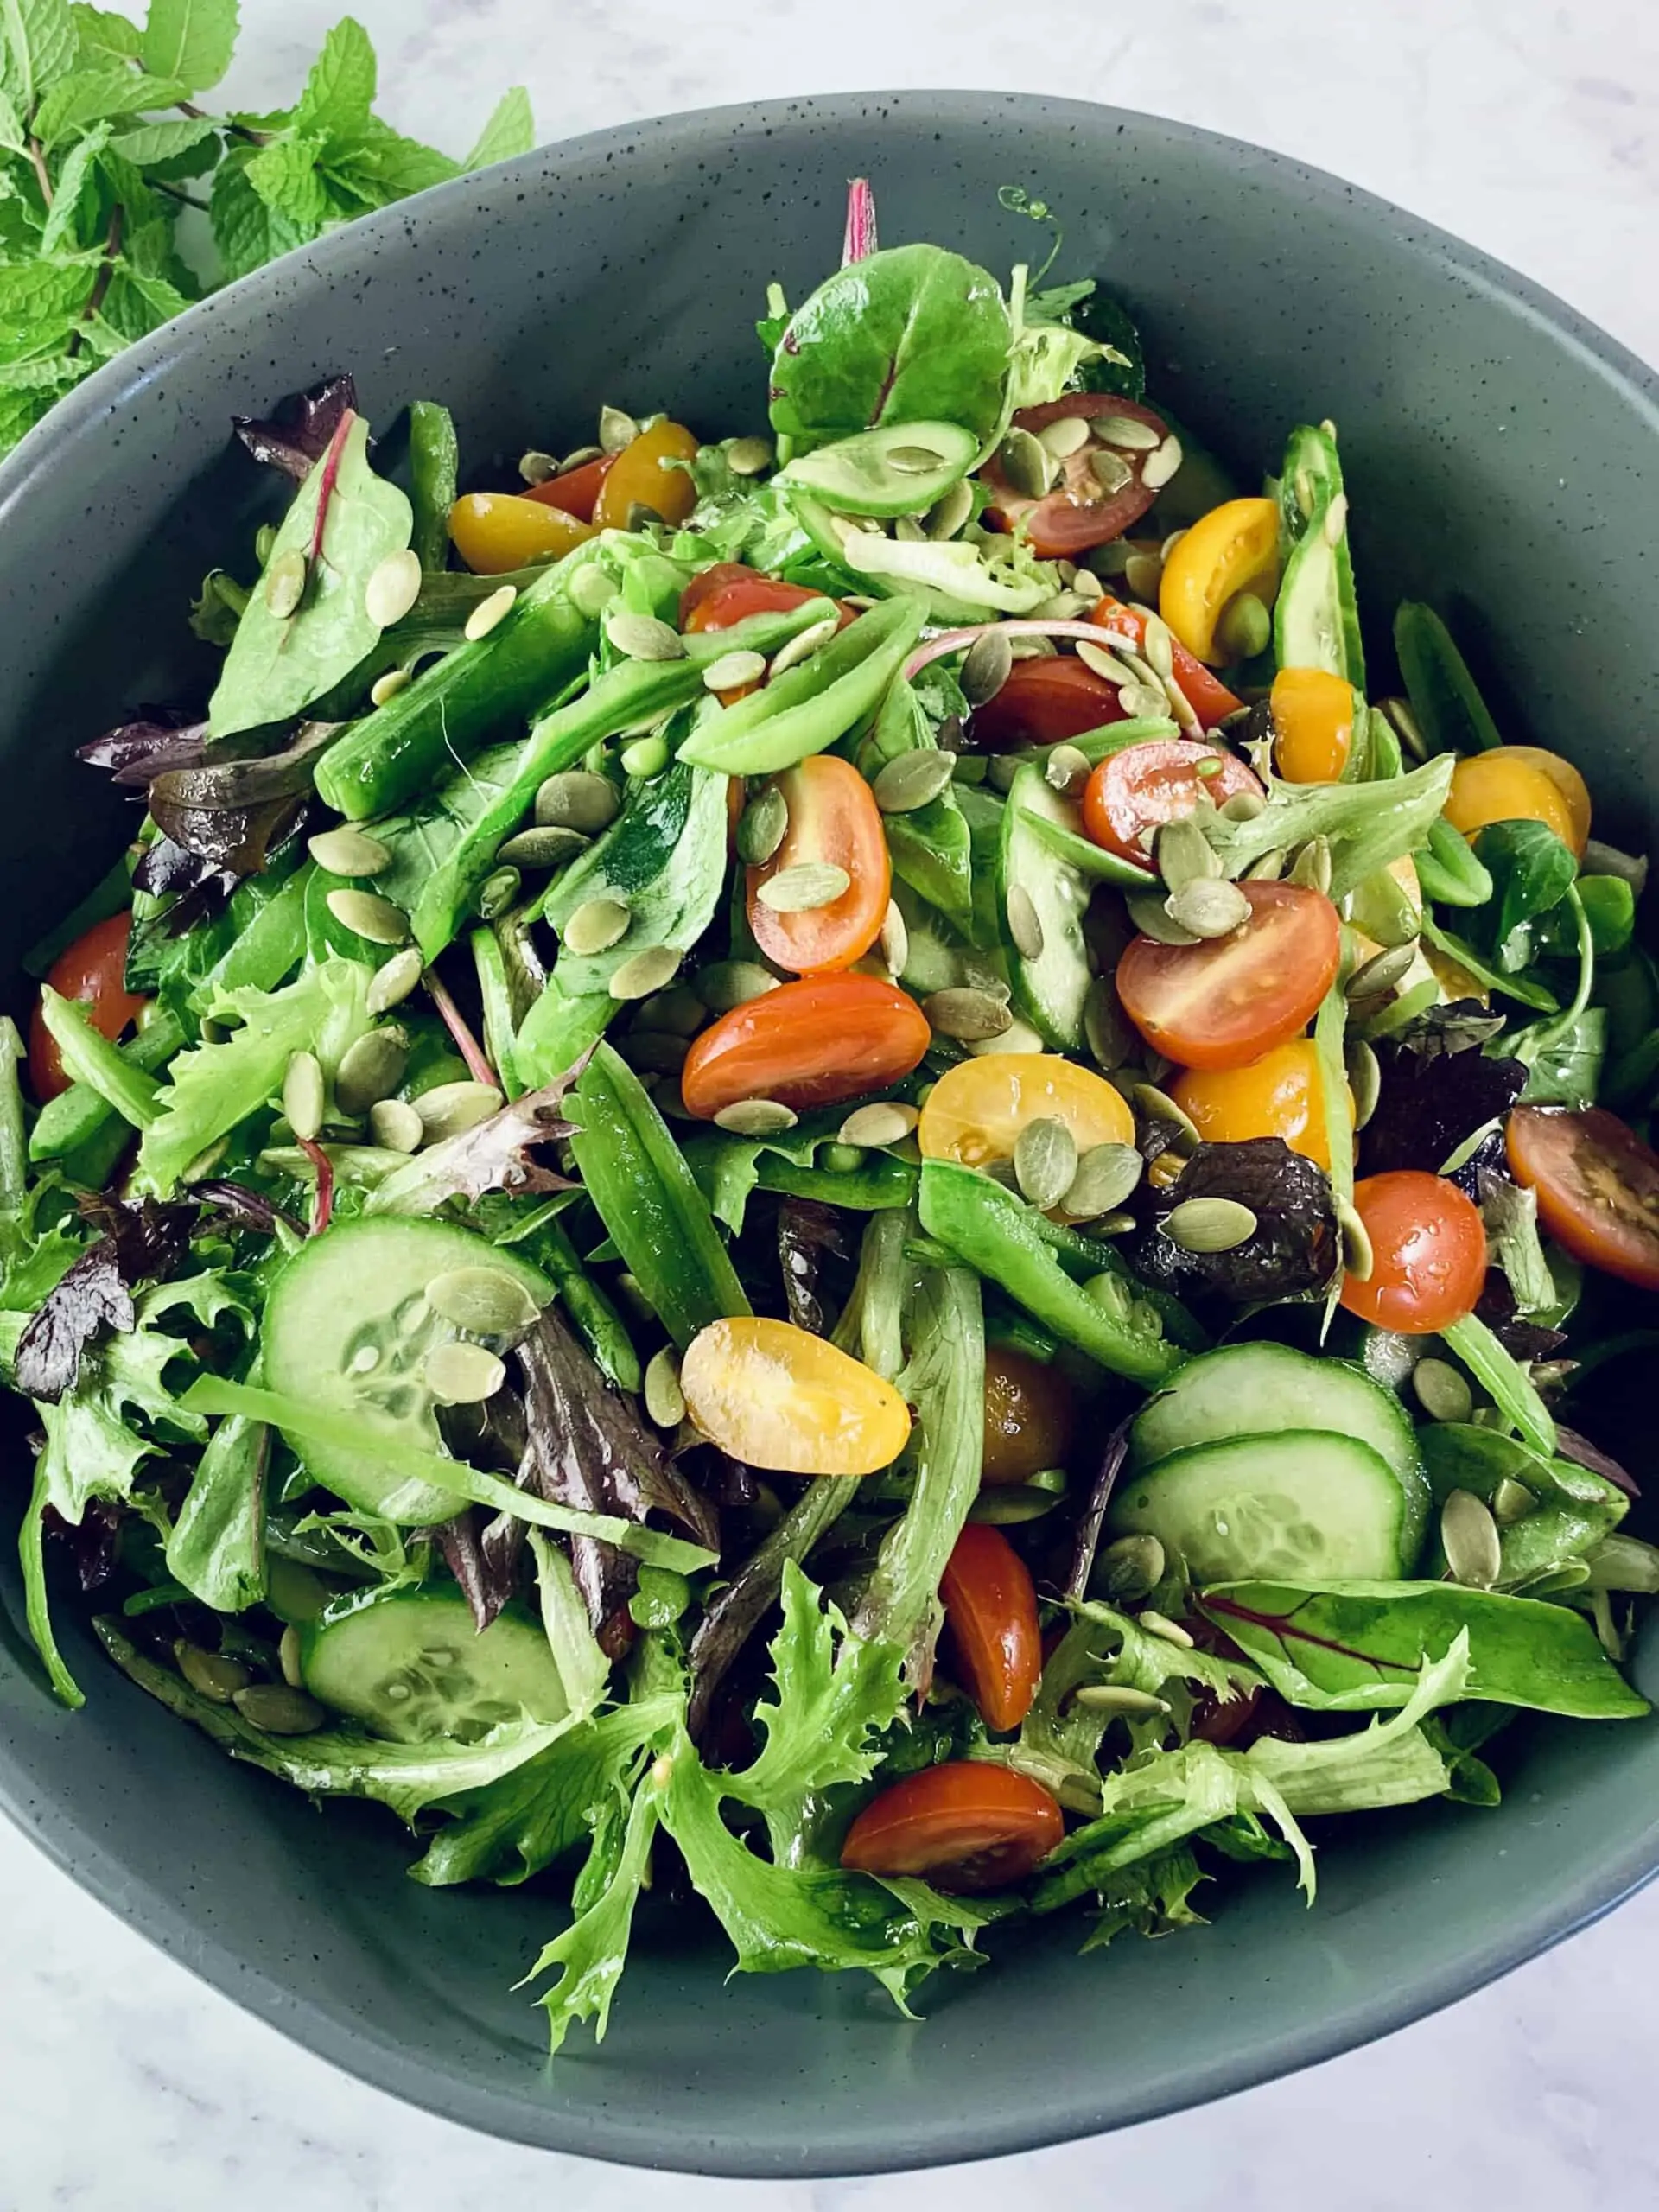 A close up of spring mix salad in a dark grey bowl with a sprig of mint in top left corner.